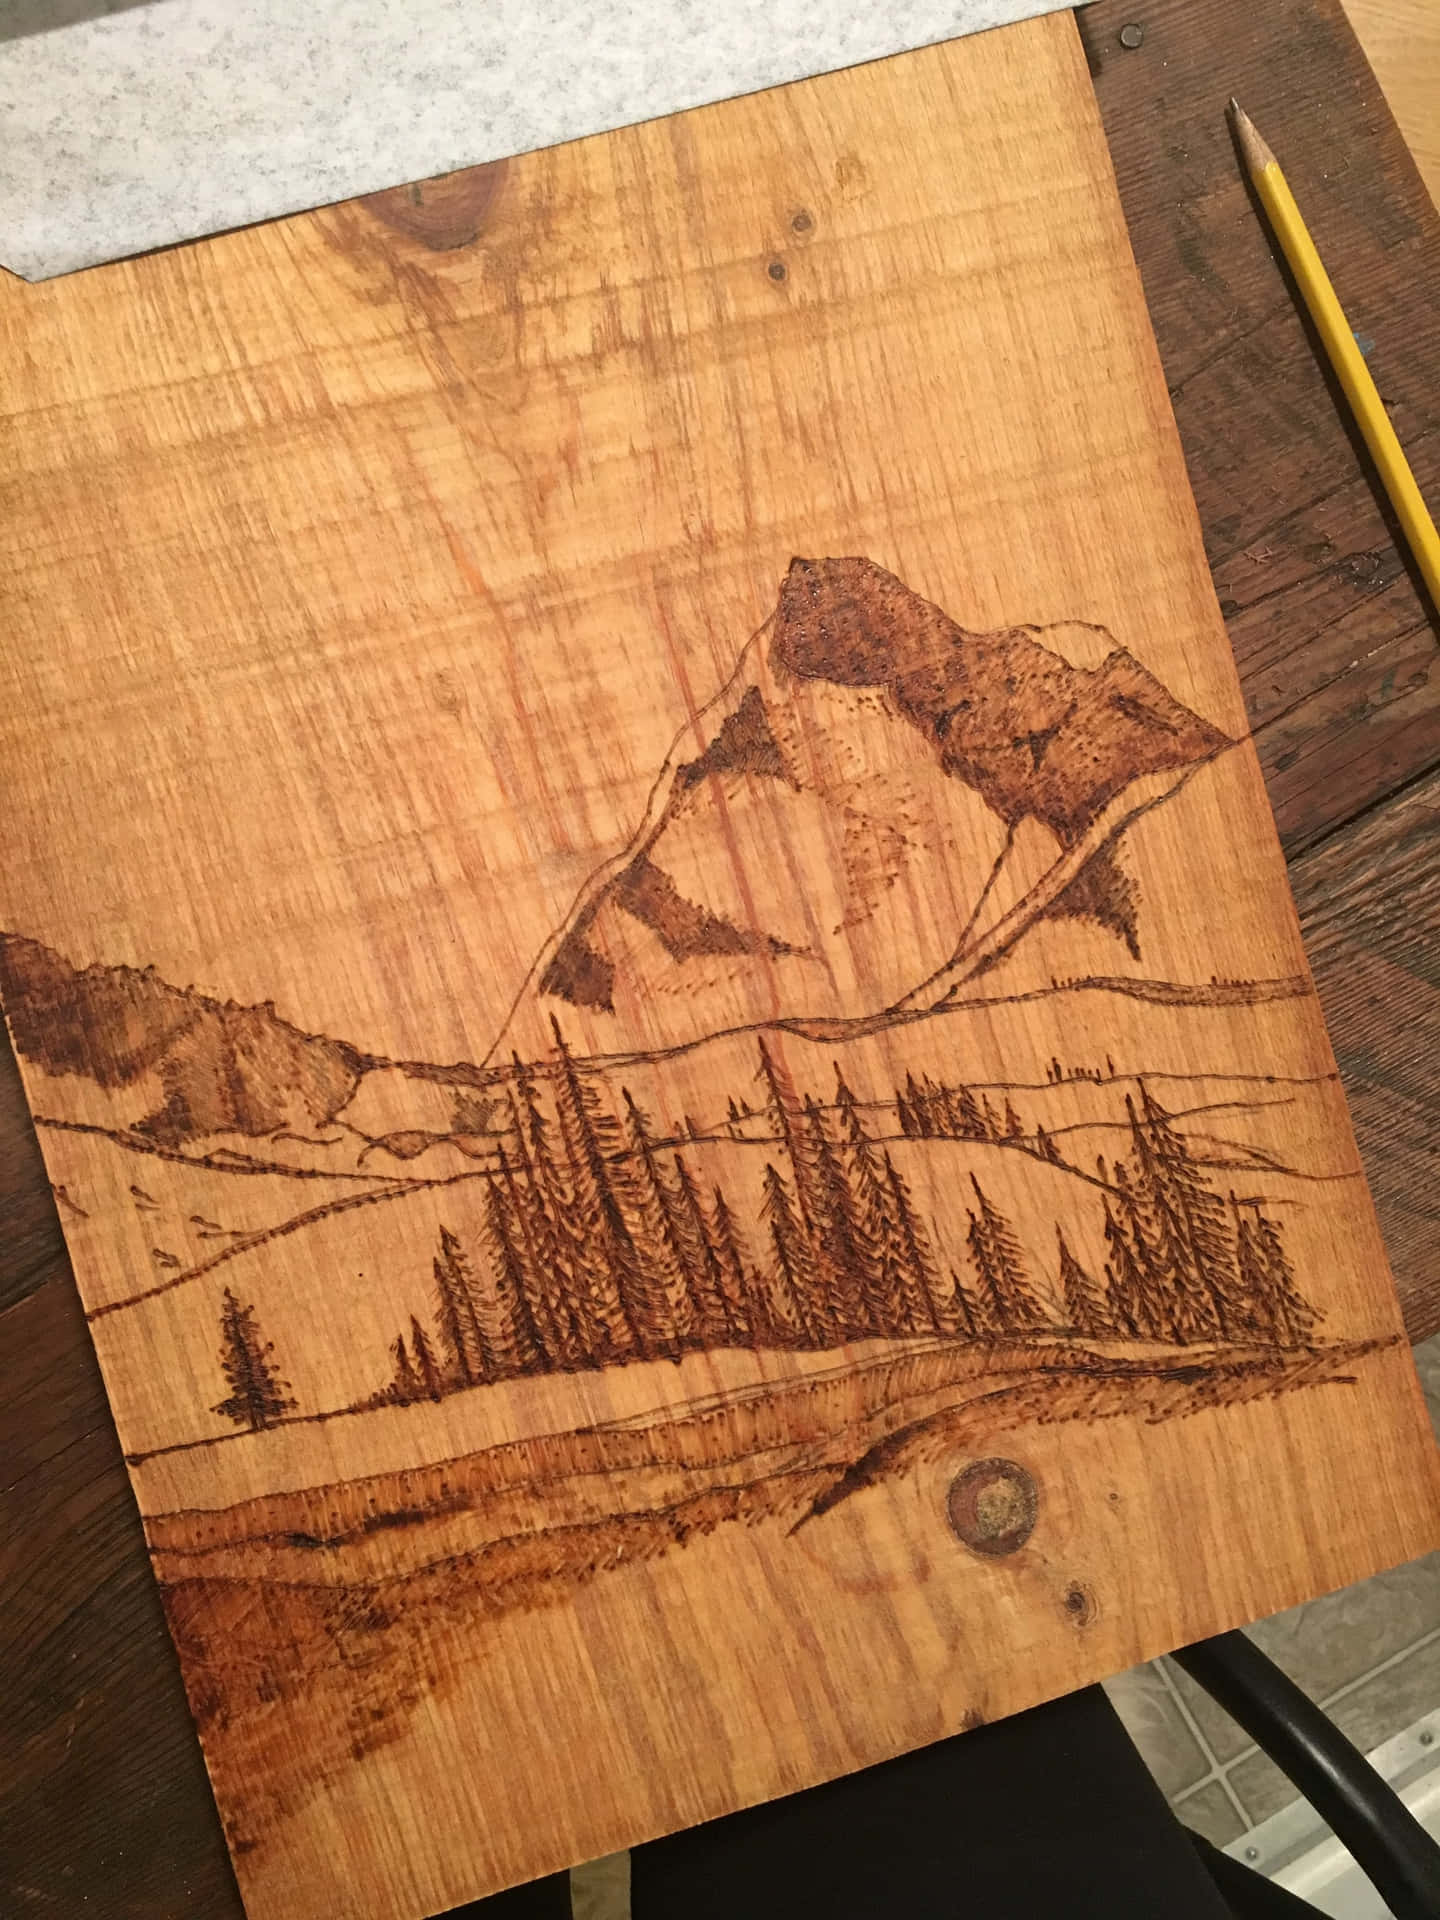 A Wooden Piece Of Art With A Mountain Scene On It